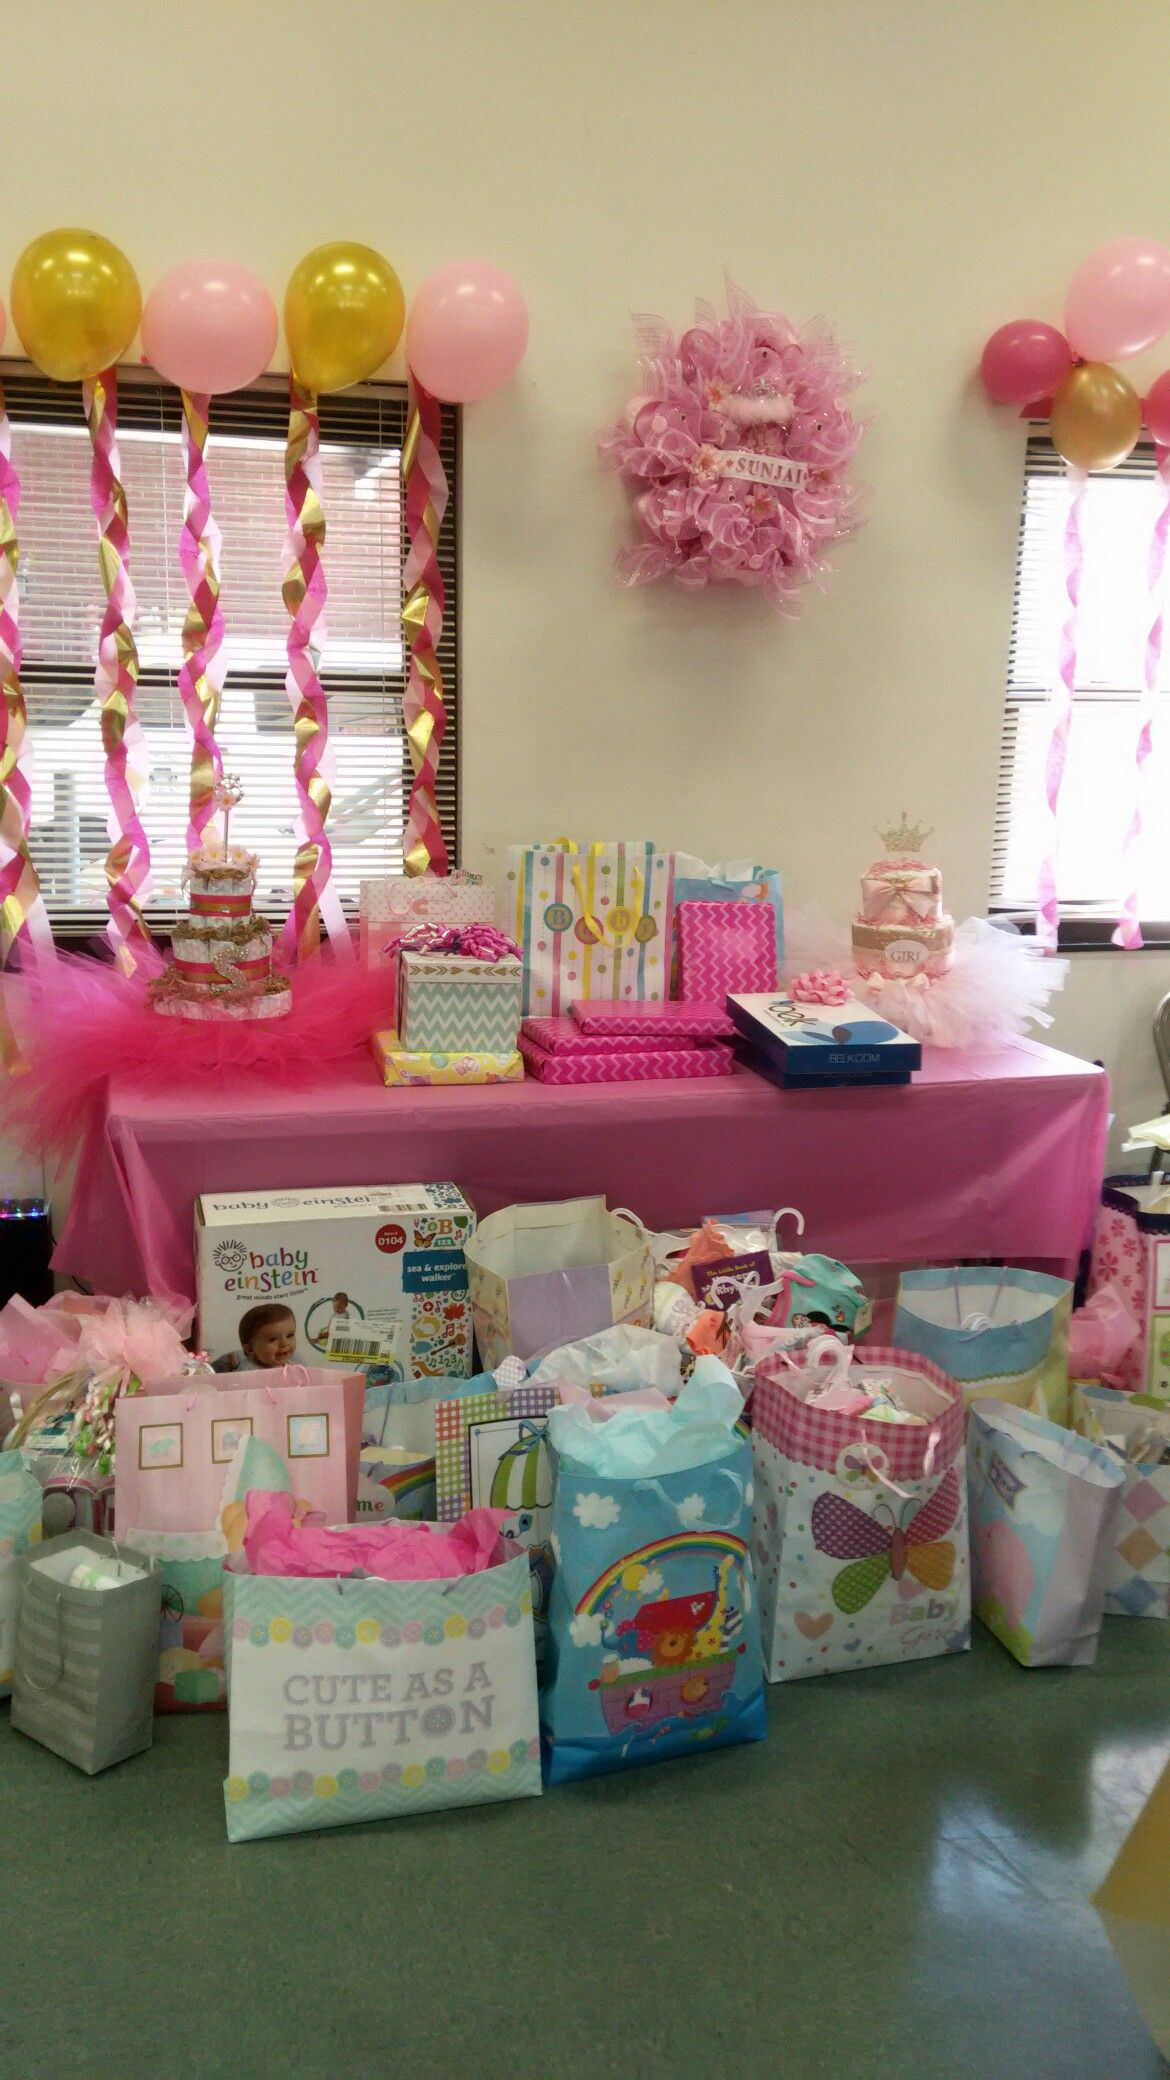 Baby Shower Gift Table Decoration
 My niece s baby shower t table in 2019